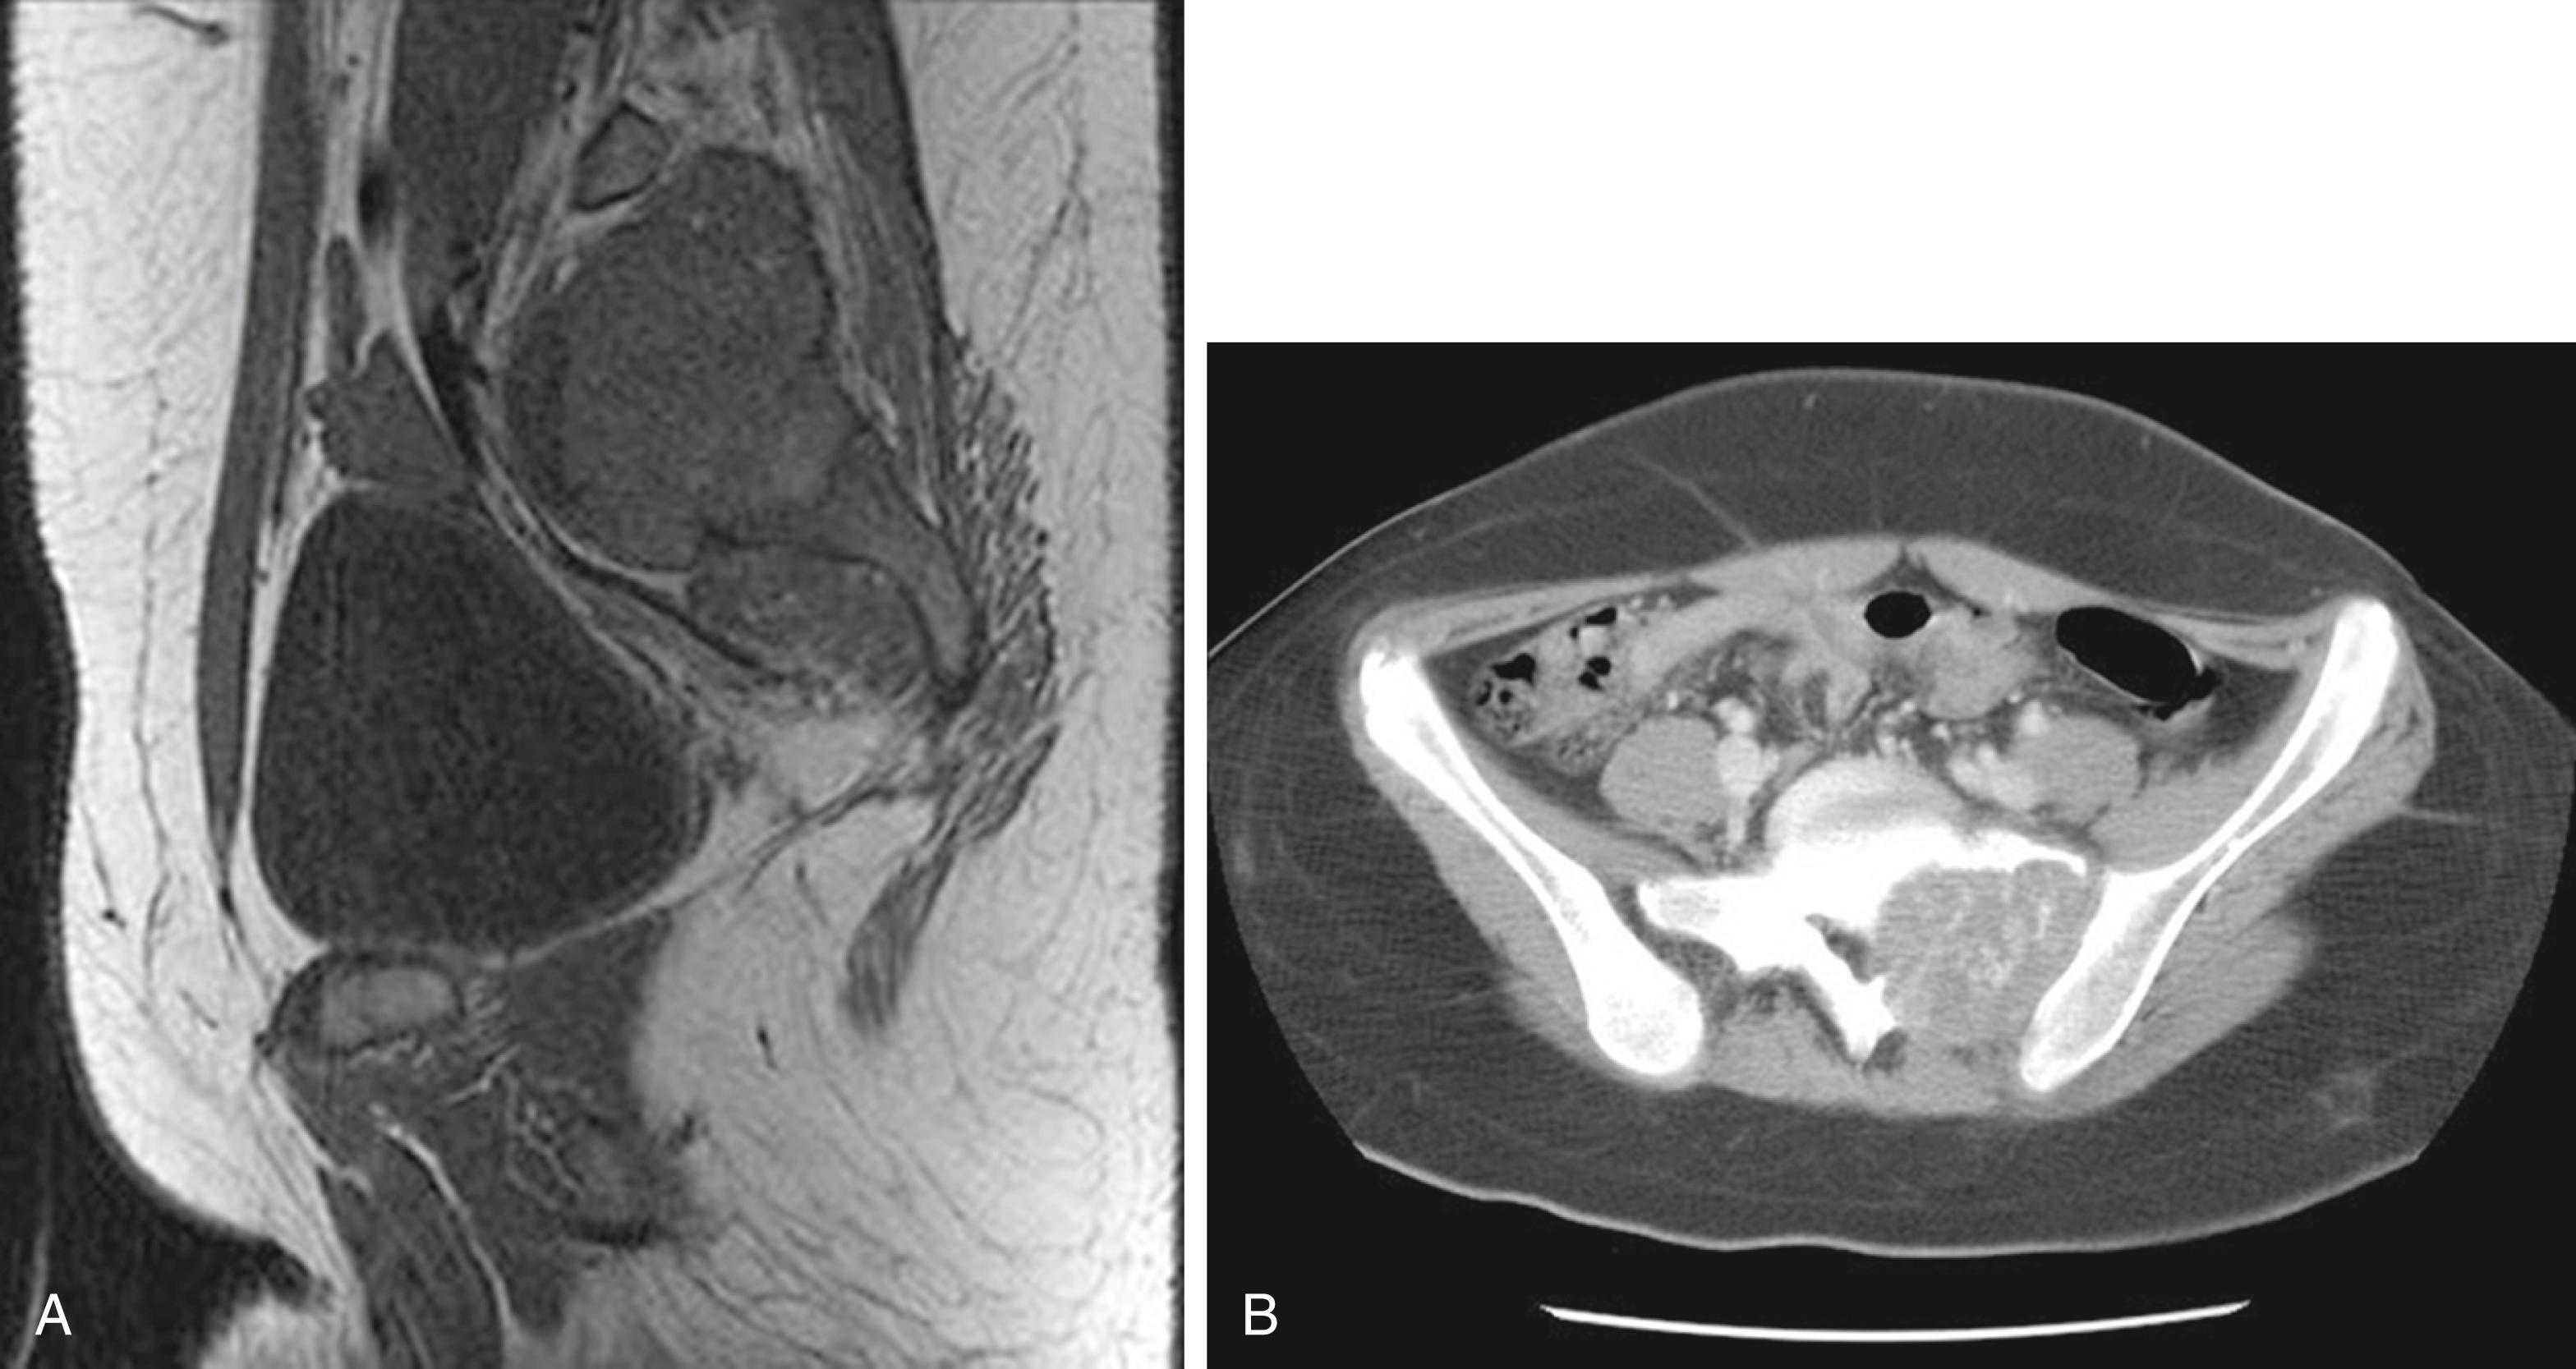 Fig. 158.6, A 13-year-old female patient, who was referred with a presumptive diagnosis of giant cell tumor of the sacrum, had approximately 2 months of left lower extremity radicular discomfort, specifically in the posterior buttock, thigh, and leg to the plantar lateral surface of the foot on the left. ( A ) Magnetic resonance imaging and ( B ) computed tomography (CT) of the pelvis showed a 5 × 5 cm destructive lesion involving the left side of the sacrum, with internal calcification. The mass was found to be extending into the spinal canal and involved the S1 and S2 neural foramen. CT-guided biopsy of the lesion confirmed a diagnosis of aneurysmal bone cyst.